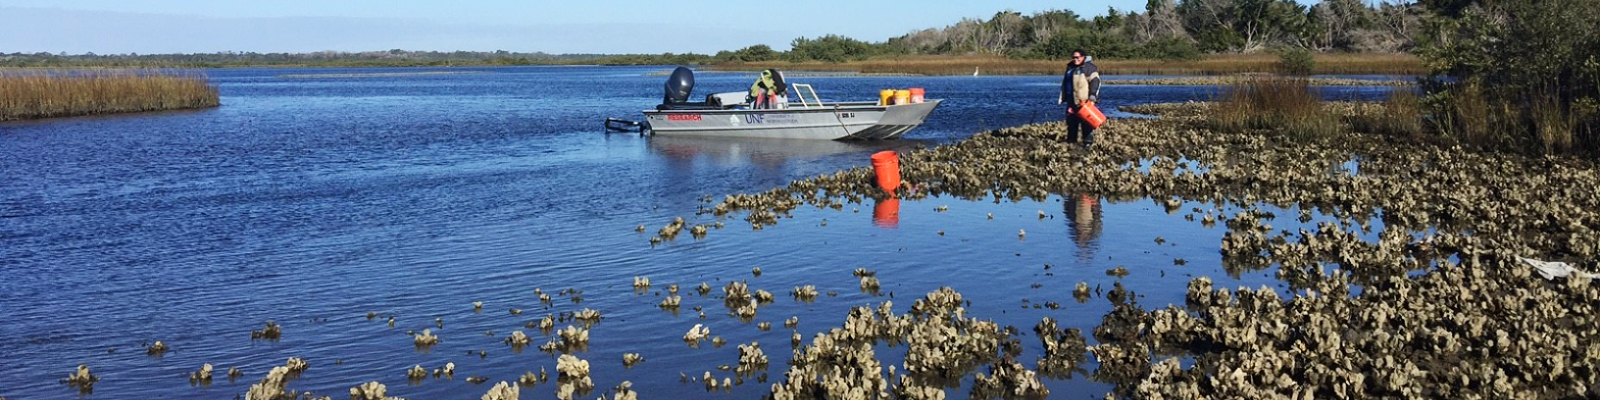 Students working on a UNF river boat with oyster beds nearby